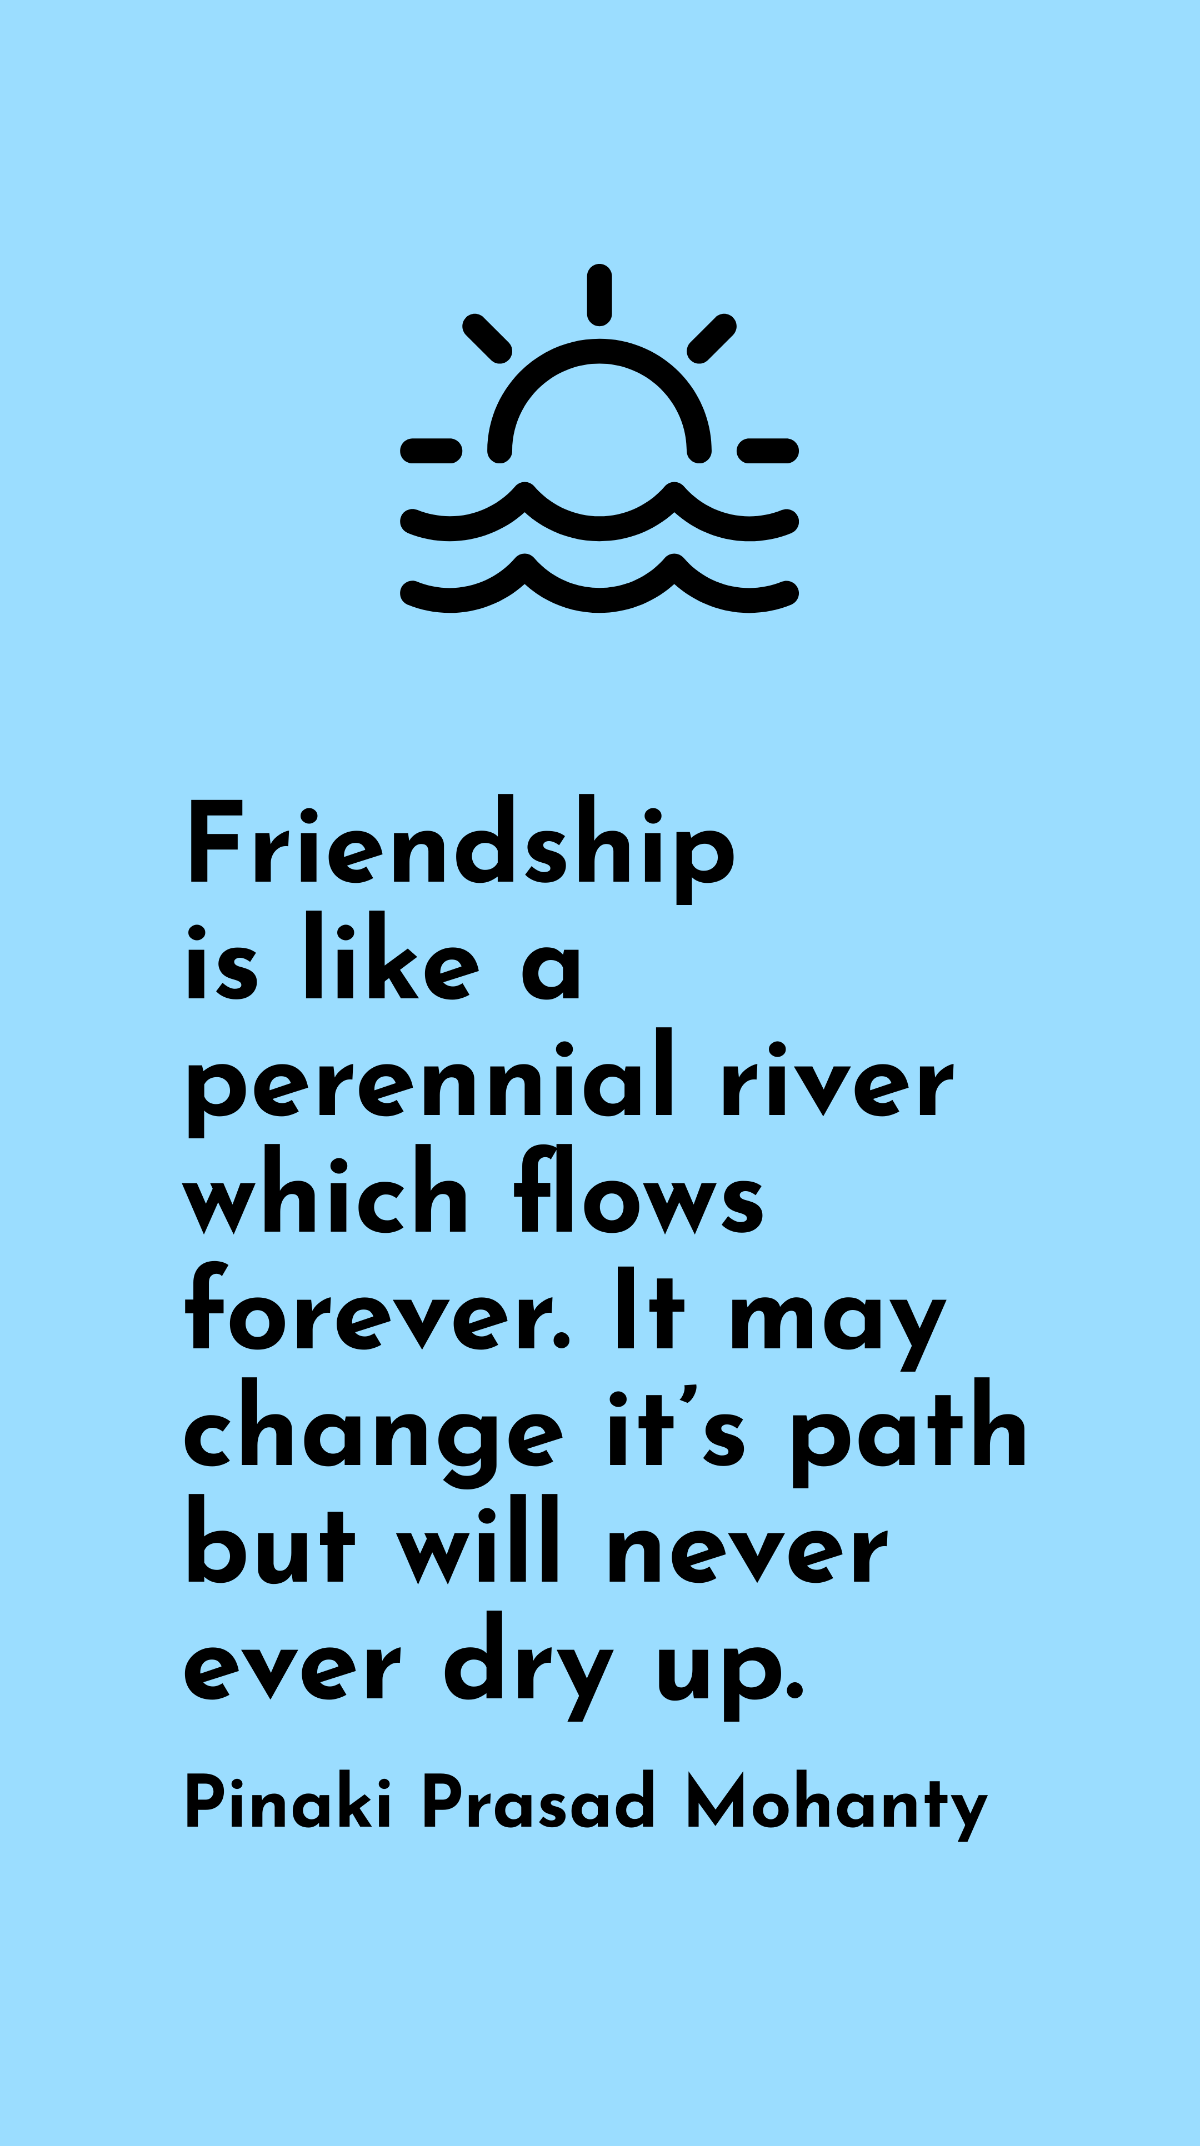 Pinaki Prasad Mohanty - Friendship is like a perennial river which flows forever. It may change it’s path but will never ever dry up. Template